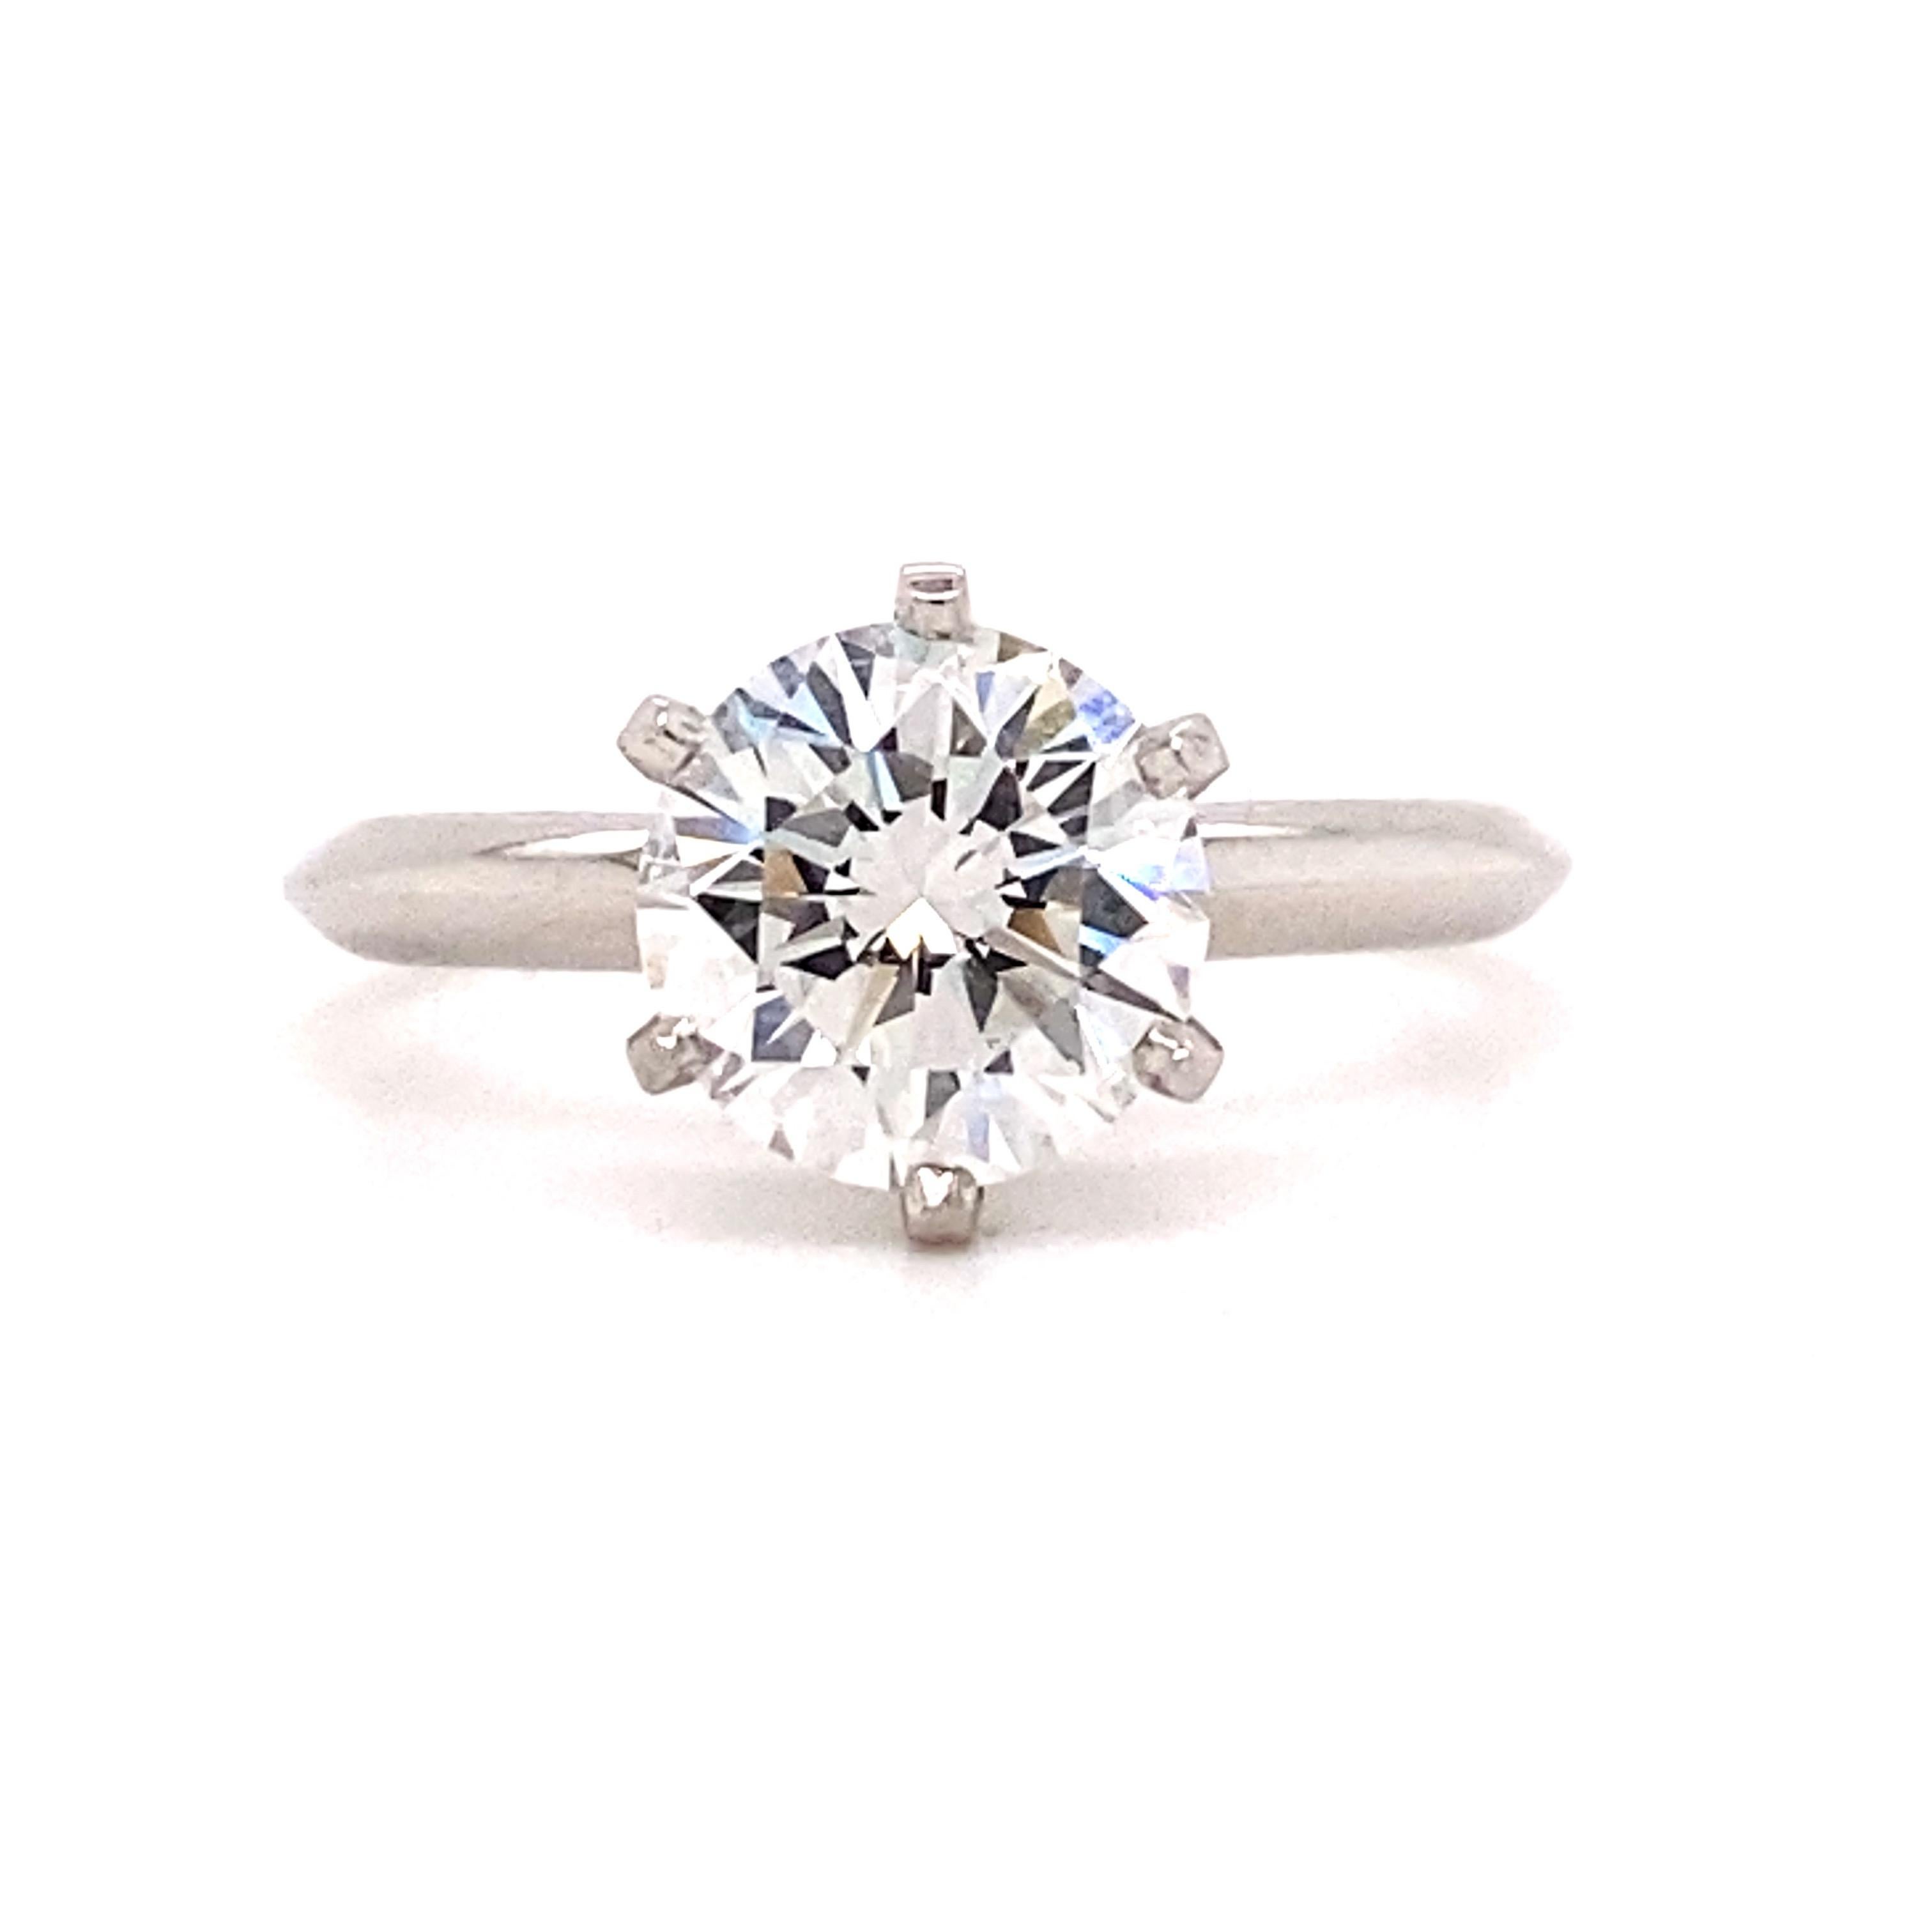 Tiffany & Co Tiffany Setting Round Diamond 2.08 Cts F VVS2 Engagement Ring Plat In Excellent Condition For Sale In San Diego, CA